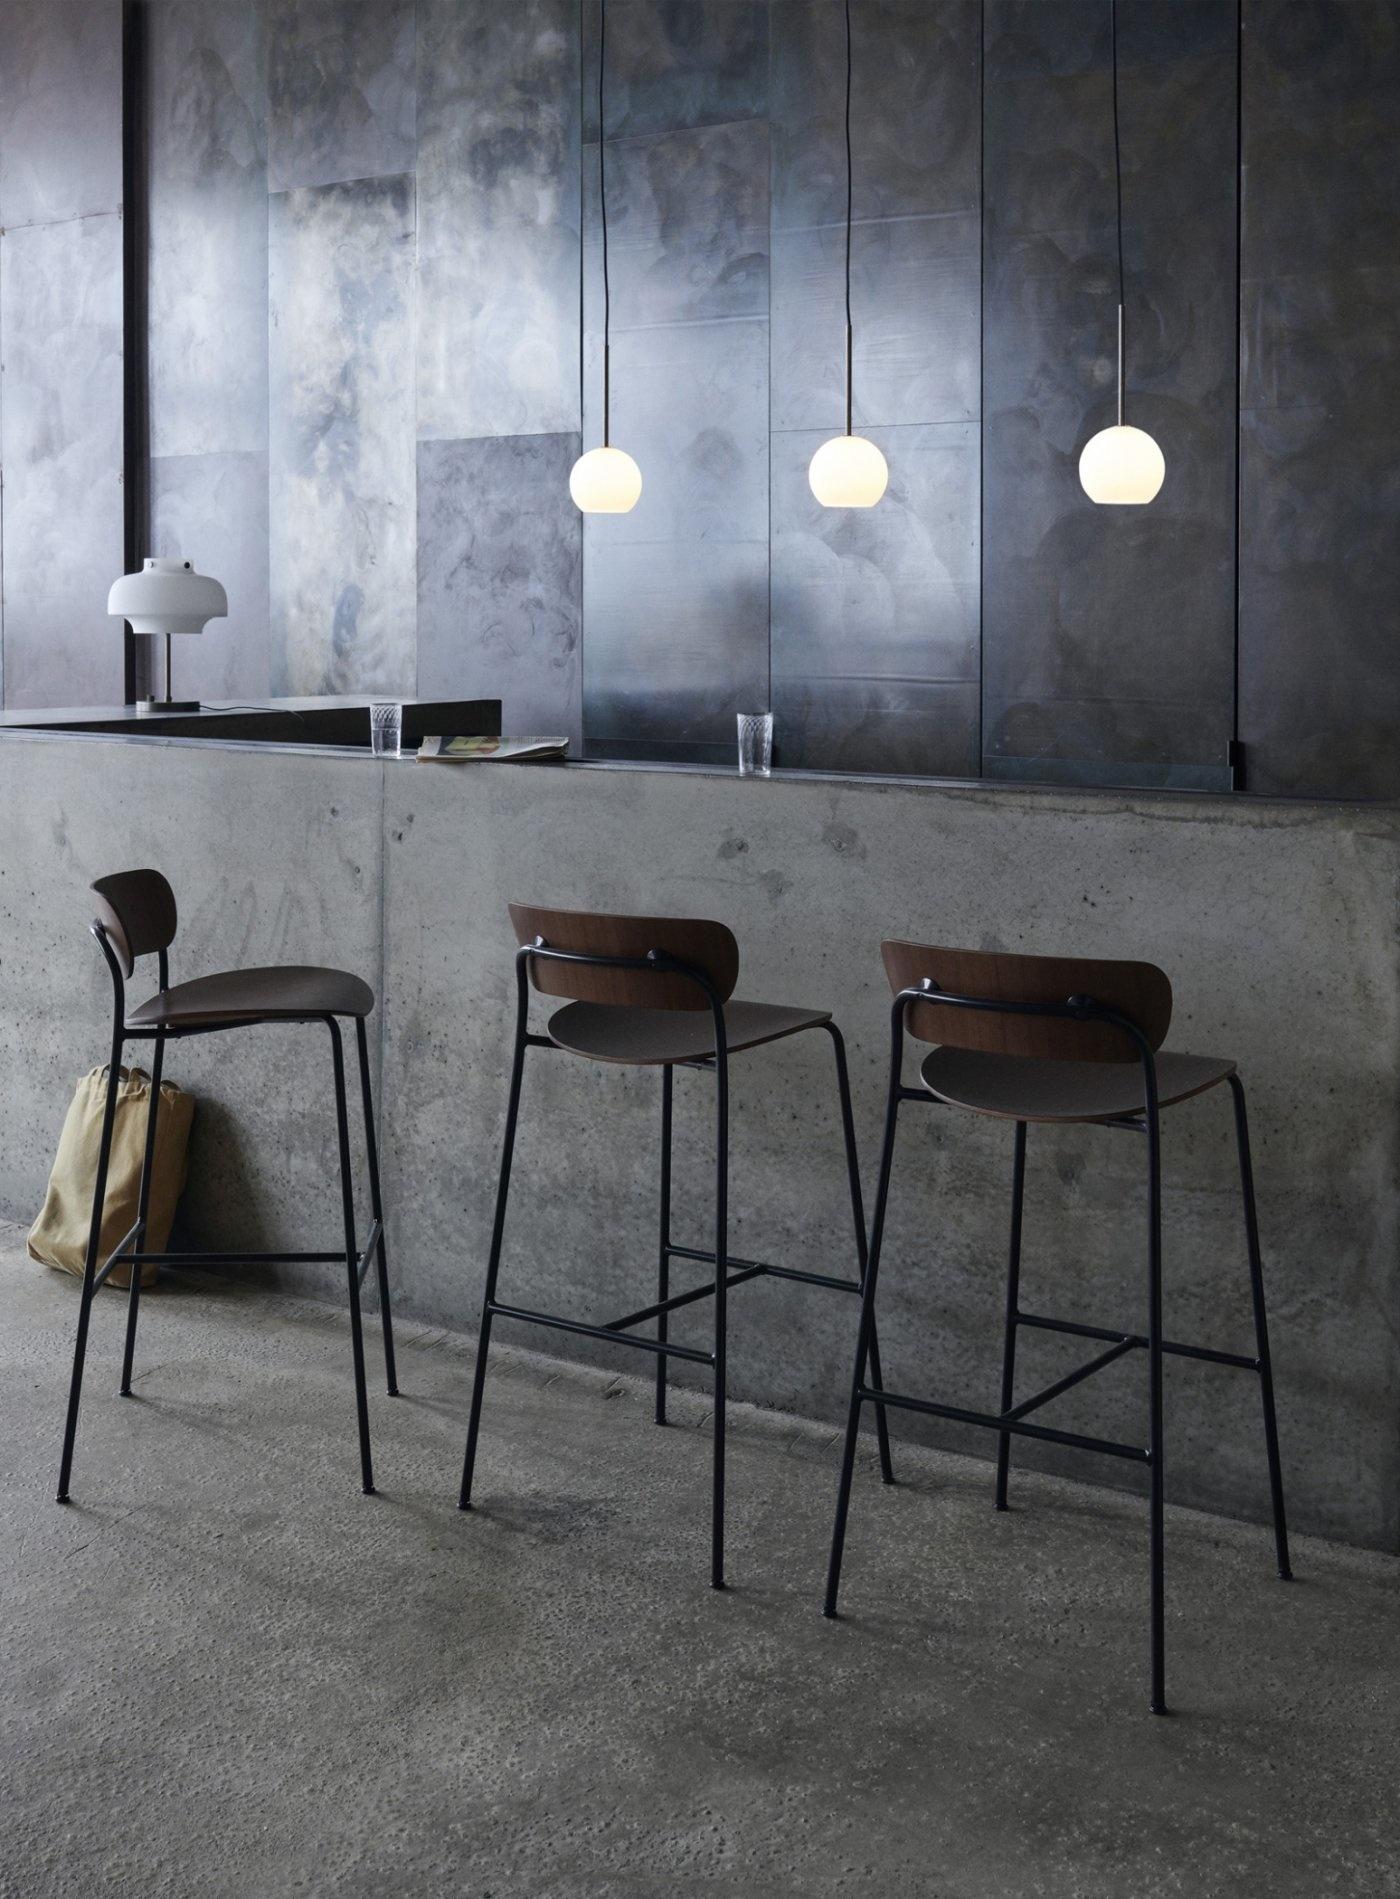 The Pavilion bar chair has an airy feeling, with fluid curves for the wood veneer seat and back which continue as lyrical lines in the steel tubes of the legs. 
The result is a silhouette that’s barely there. Ideal for furnishing an expansive bar